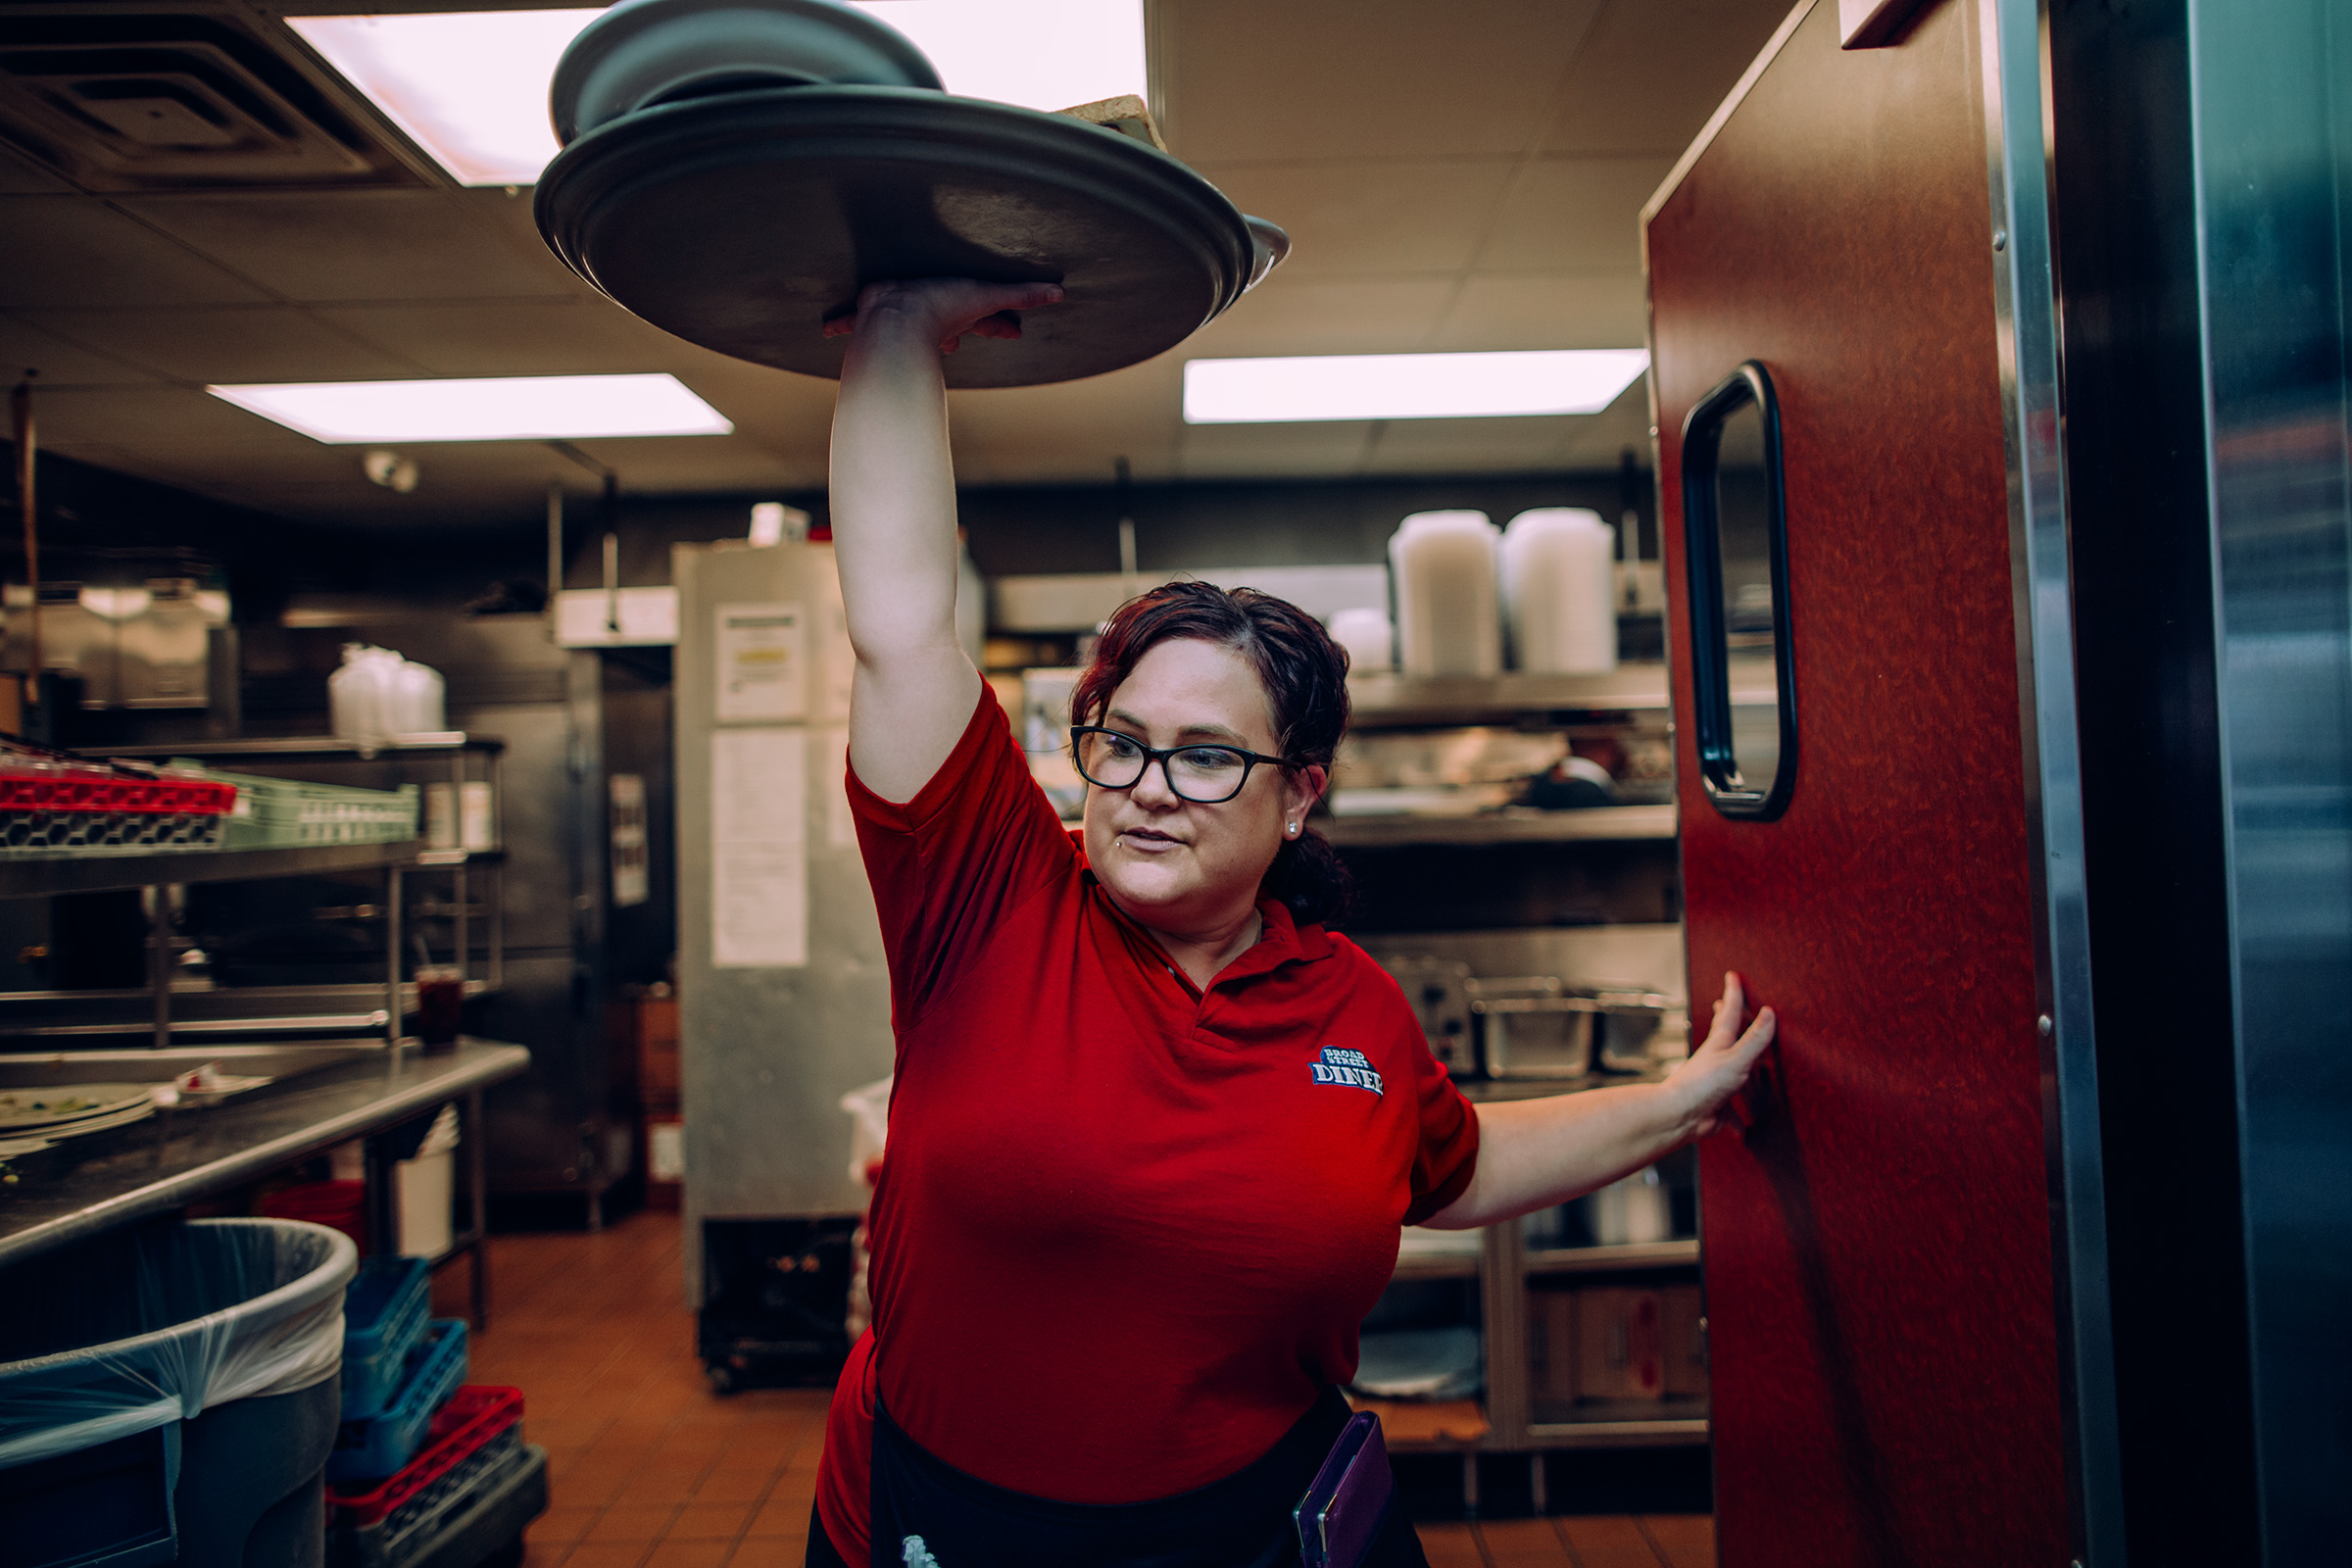 Christina Munce waits tables at Broad Street Diner in Philadelphia, where she’s worked for more than eight years. (Sasha Arutyunova for TIME)